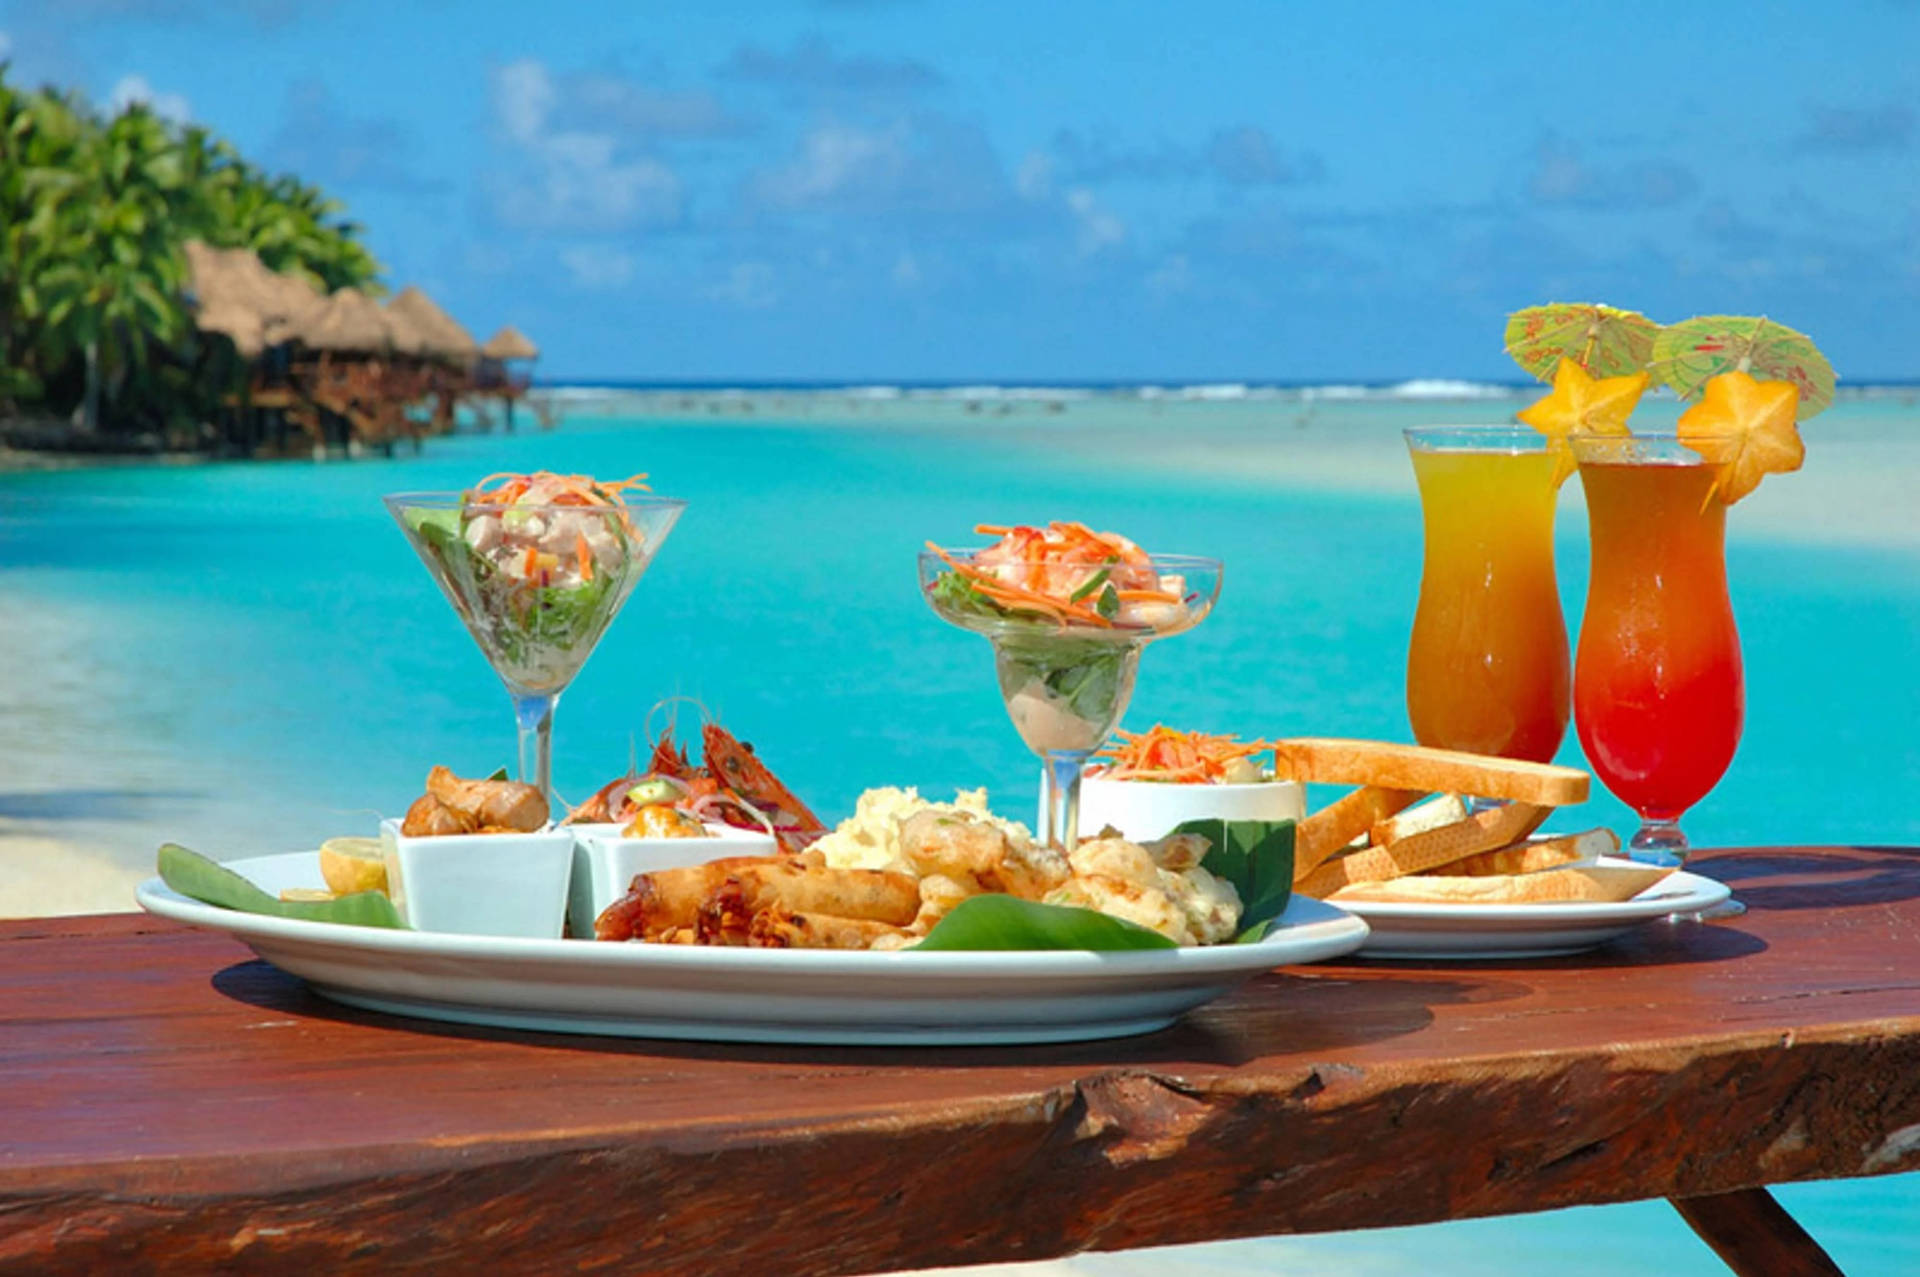 Refreshing Tropical Lunch With Fruity Drinks